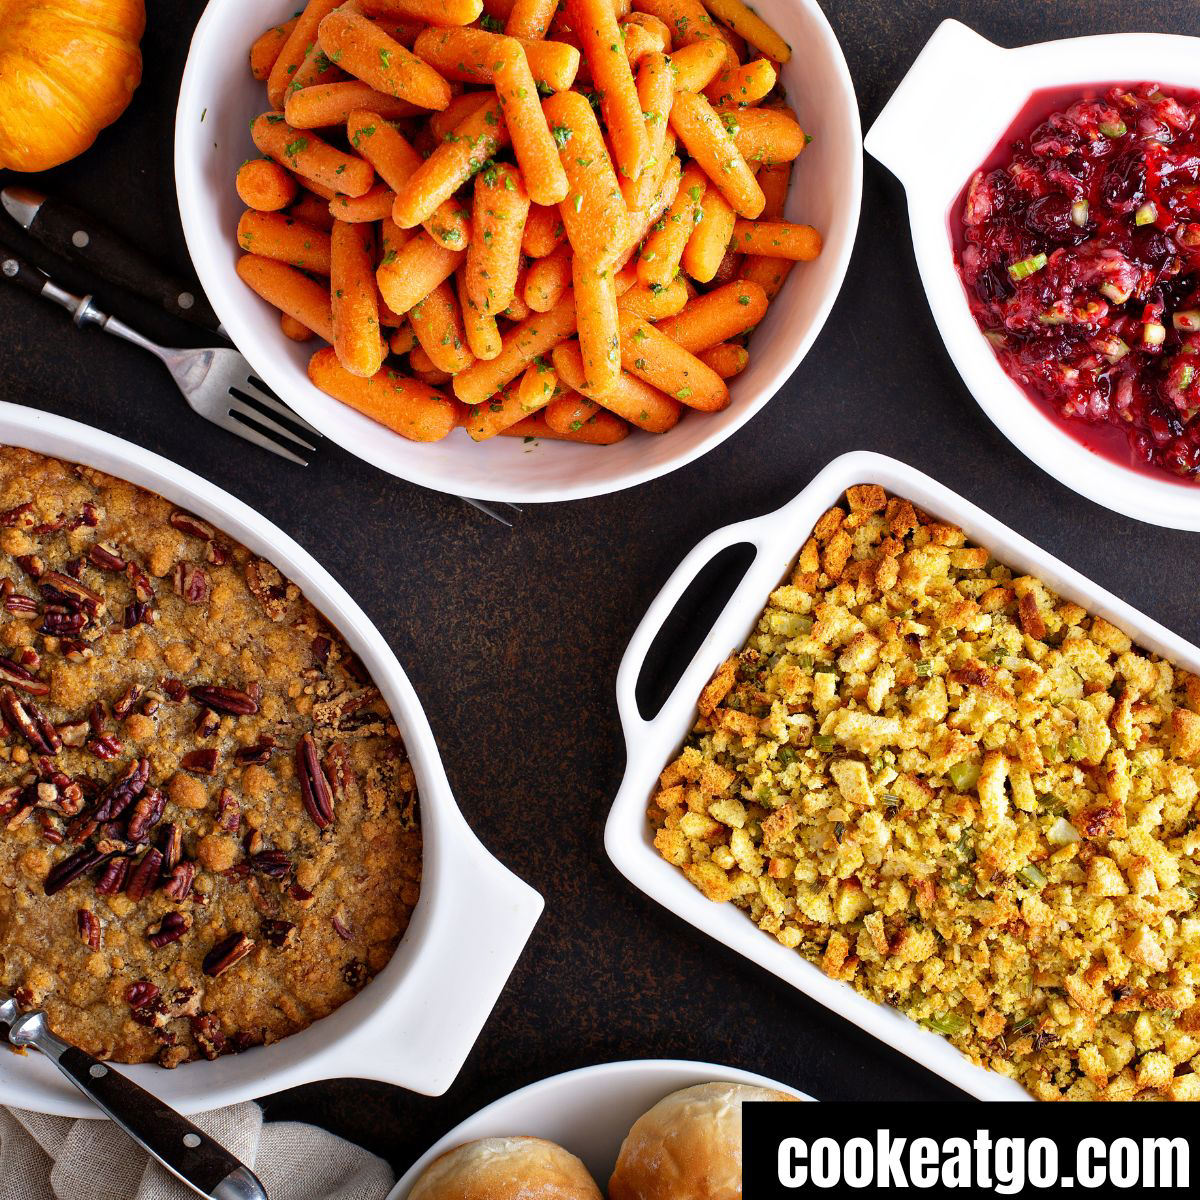 Delicous Side Dishes for Thanskgiving Dinner!